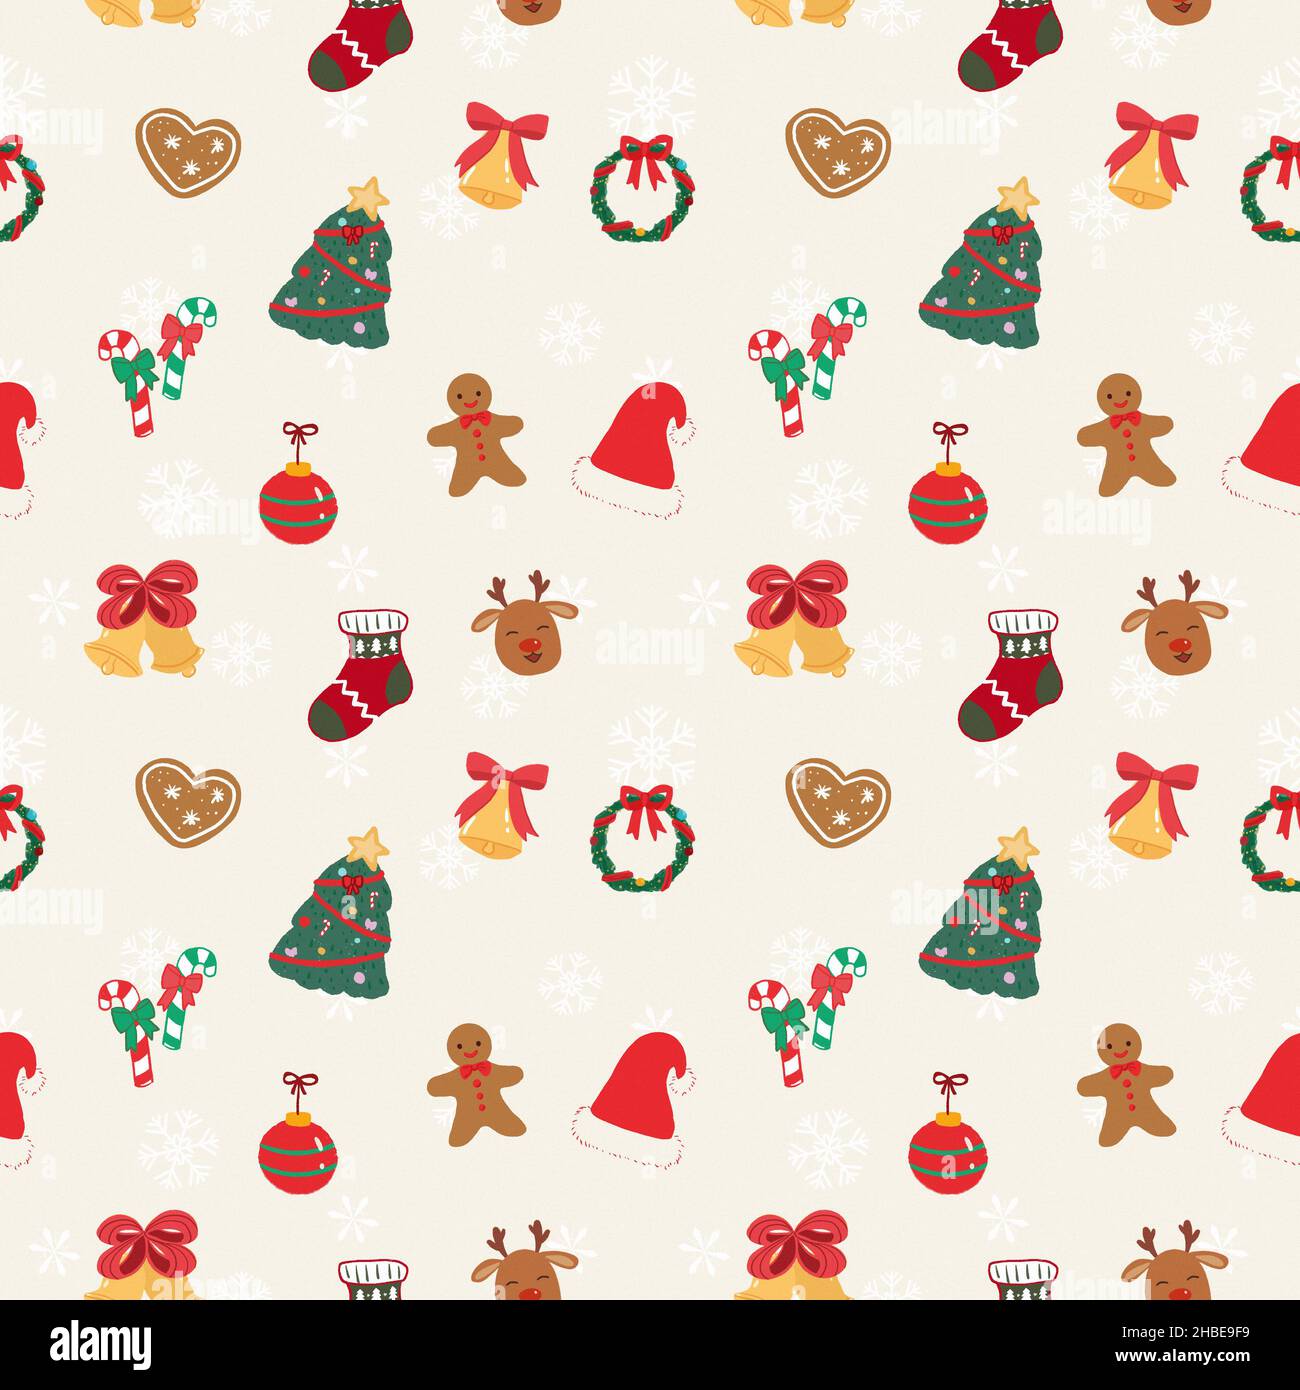 Seamless pattern design with hand-drawn Christmas cute elements